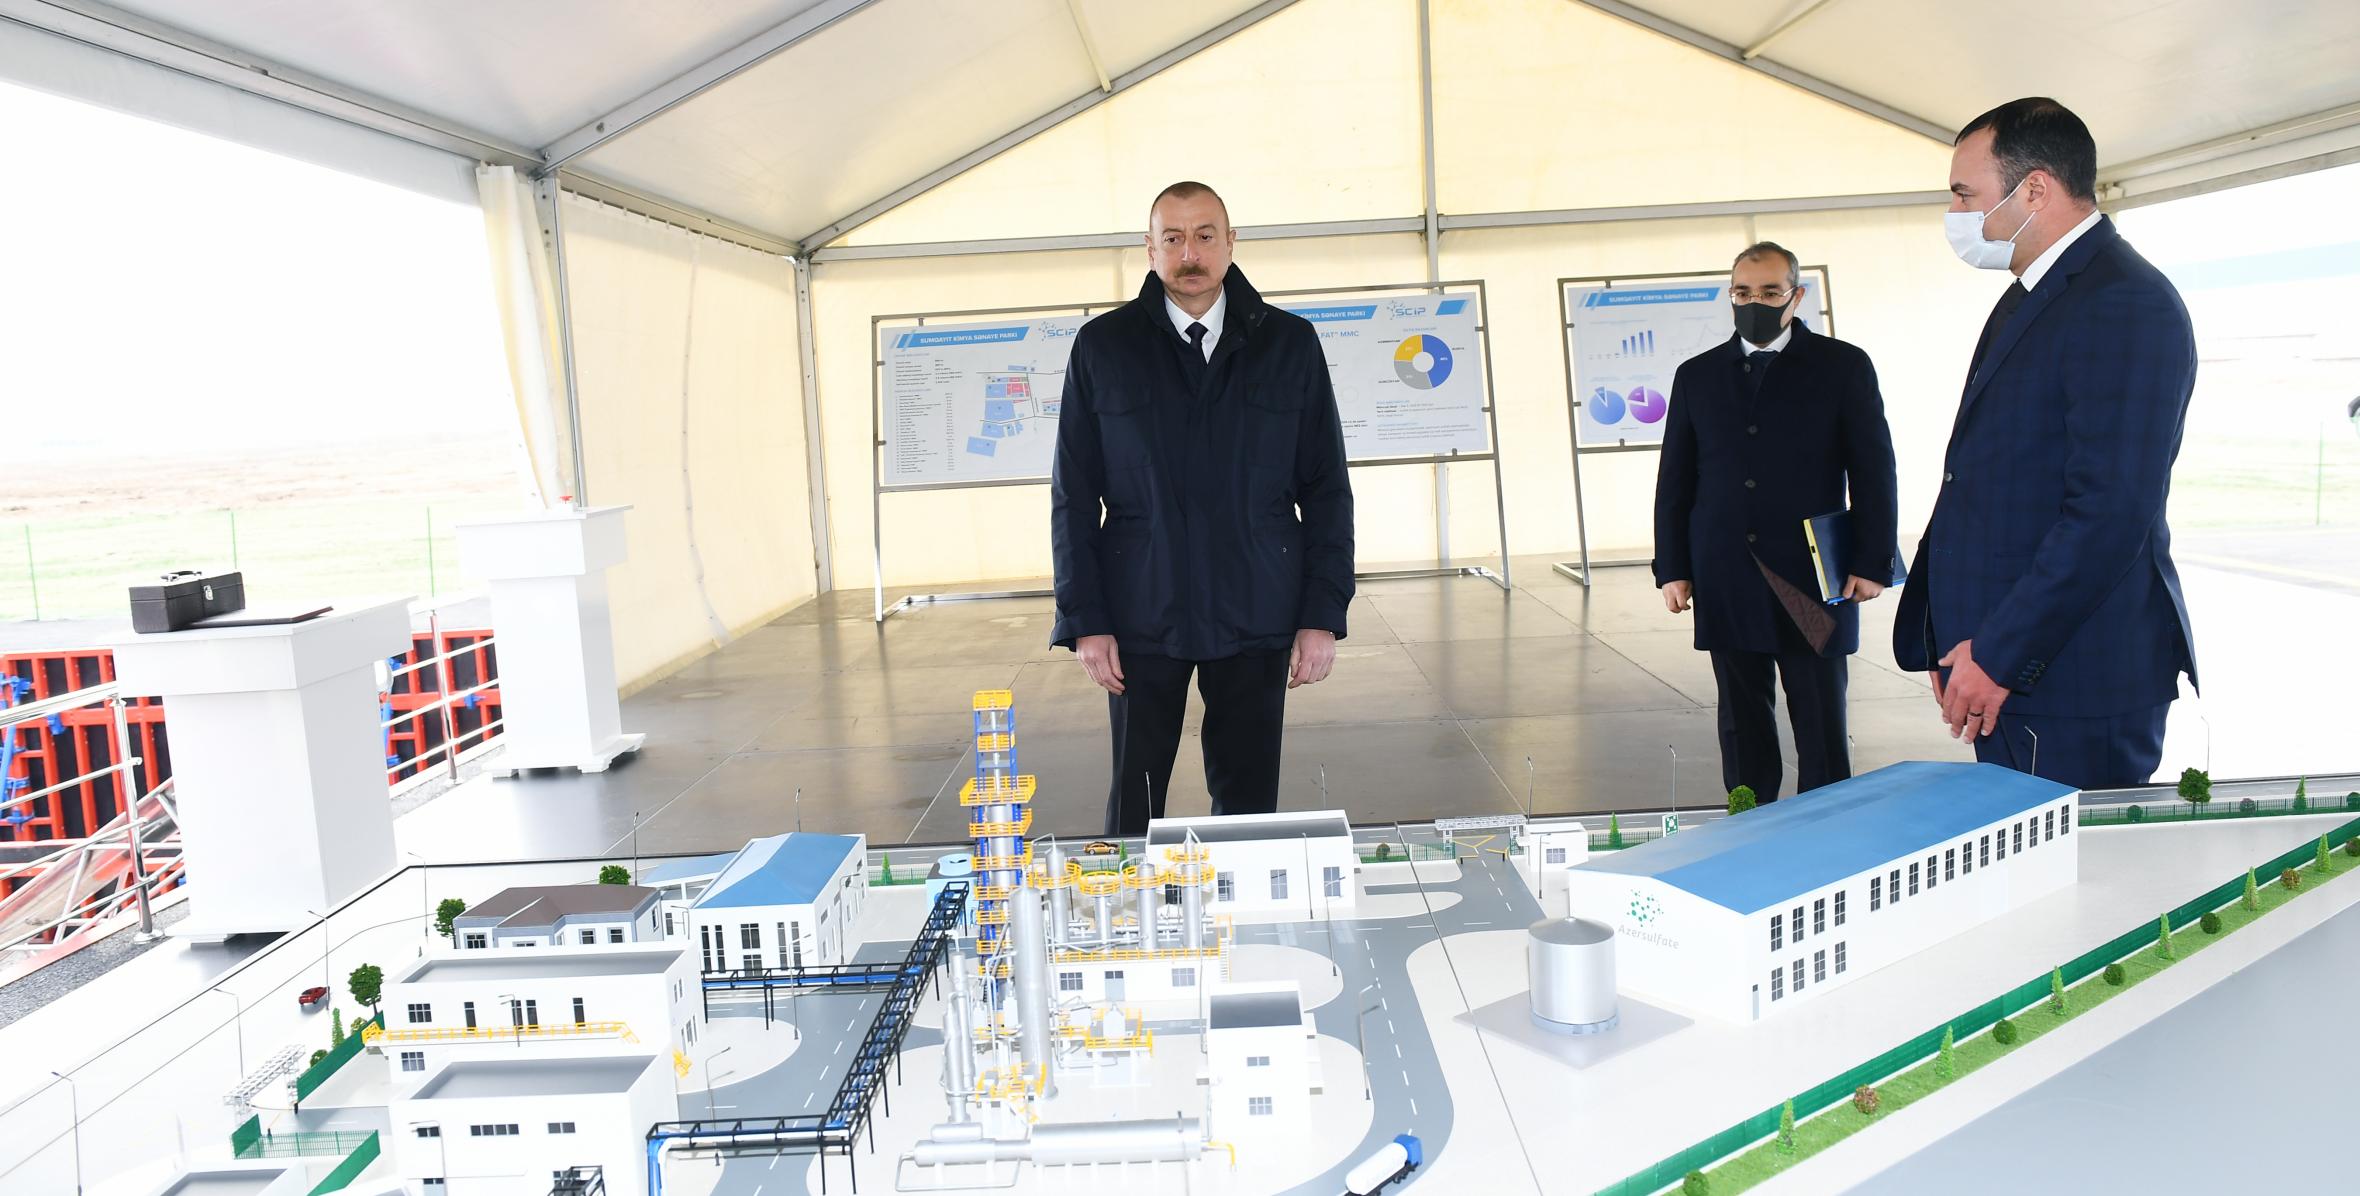 Ilham Aliyev attended a groundbreaking ceremony for two plants in Sumgayit Chemical Industry Park and inaugurated a sheet glass factory